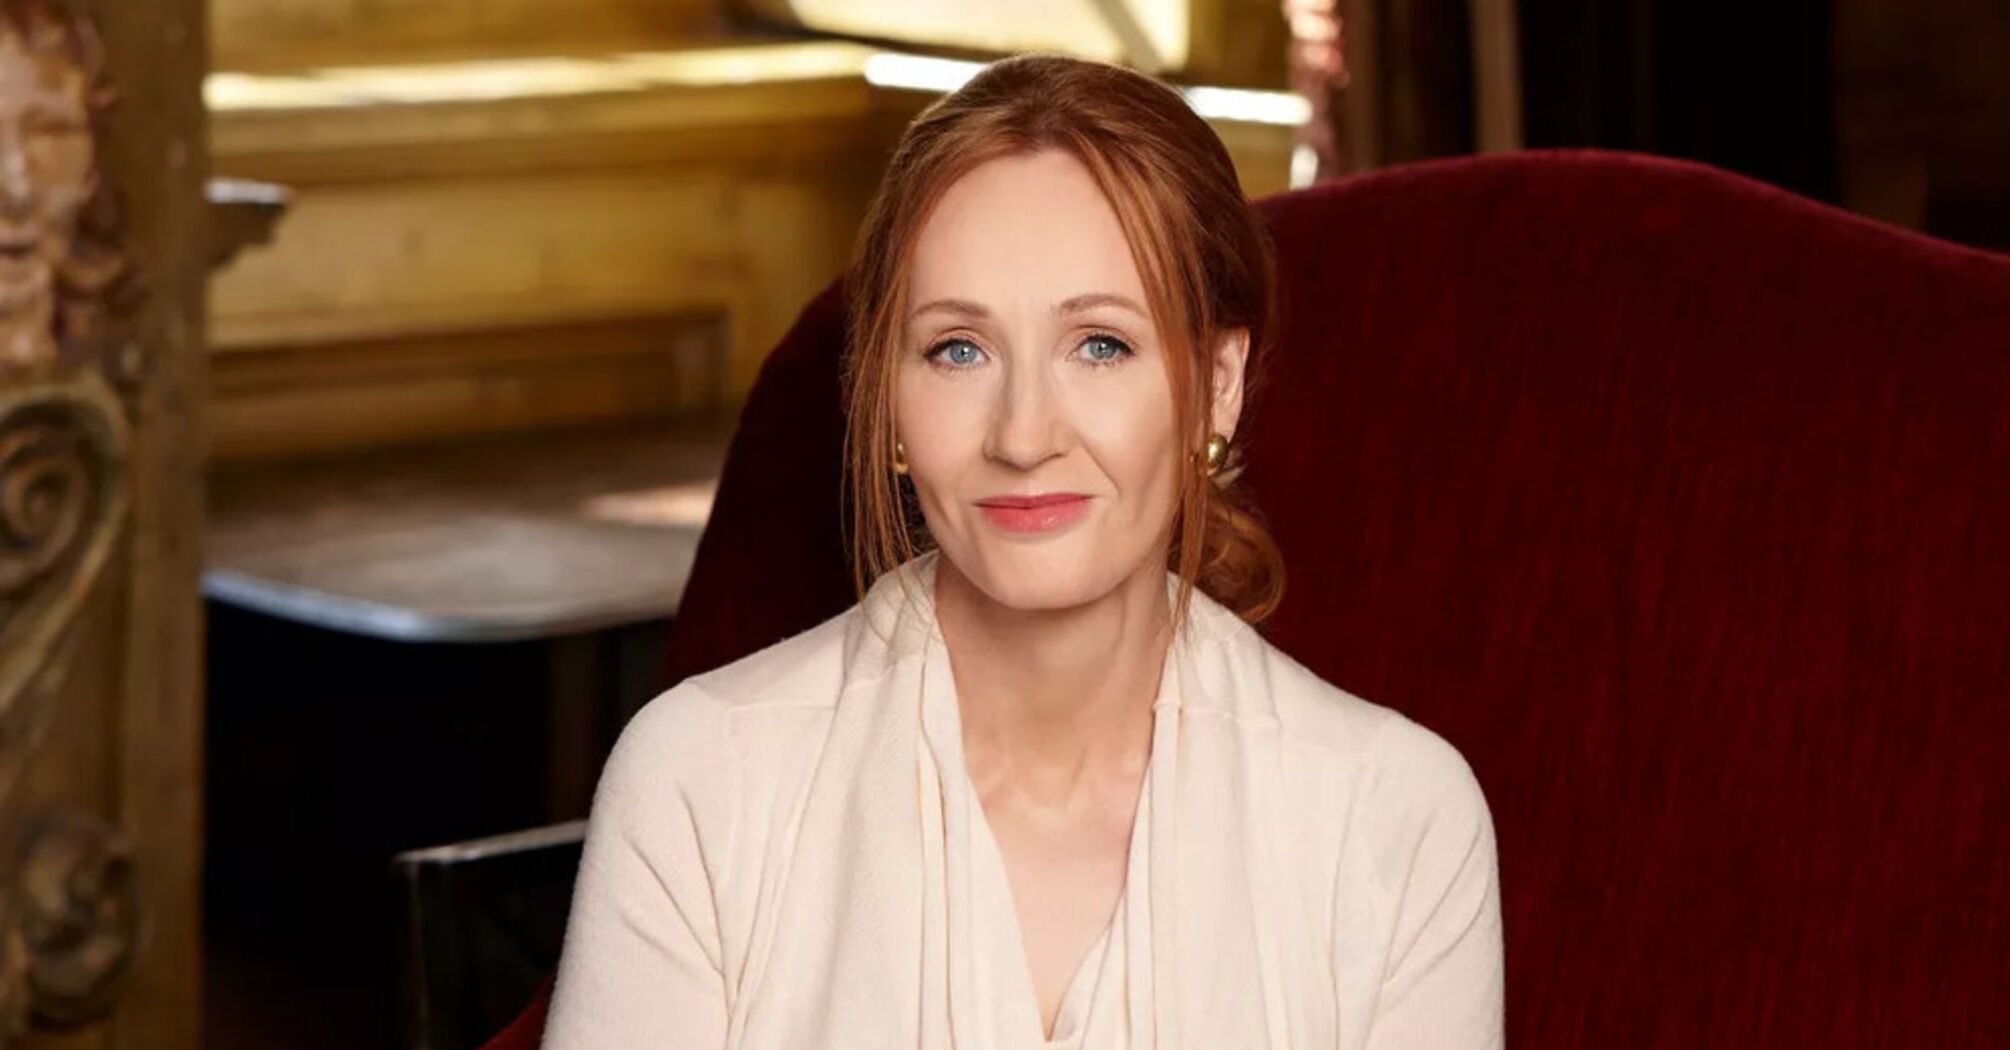 5 interesting facts about J.K. Rowling